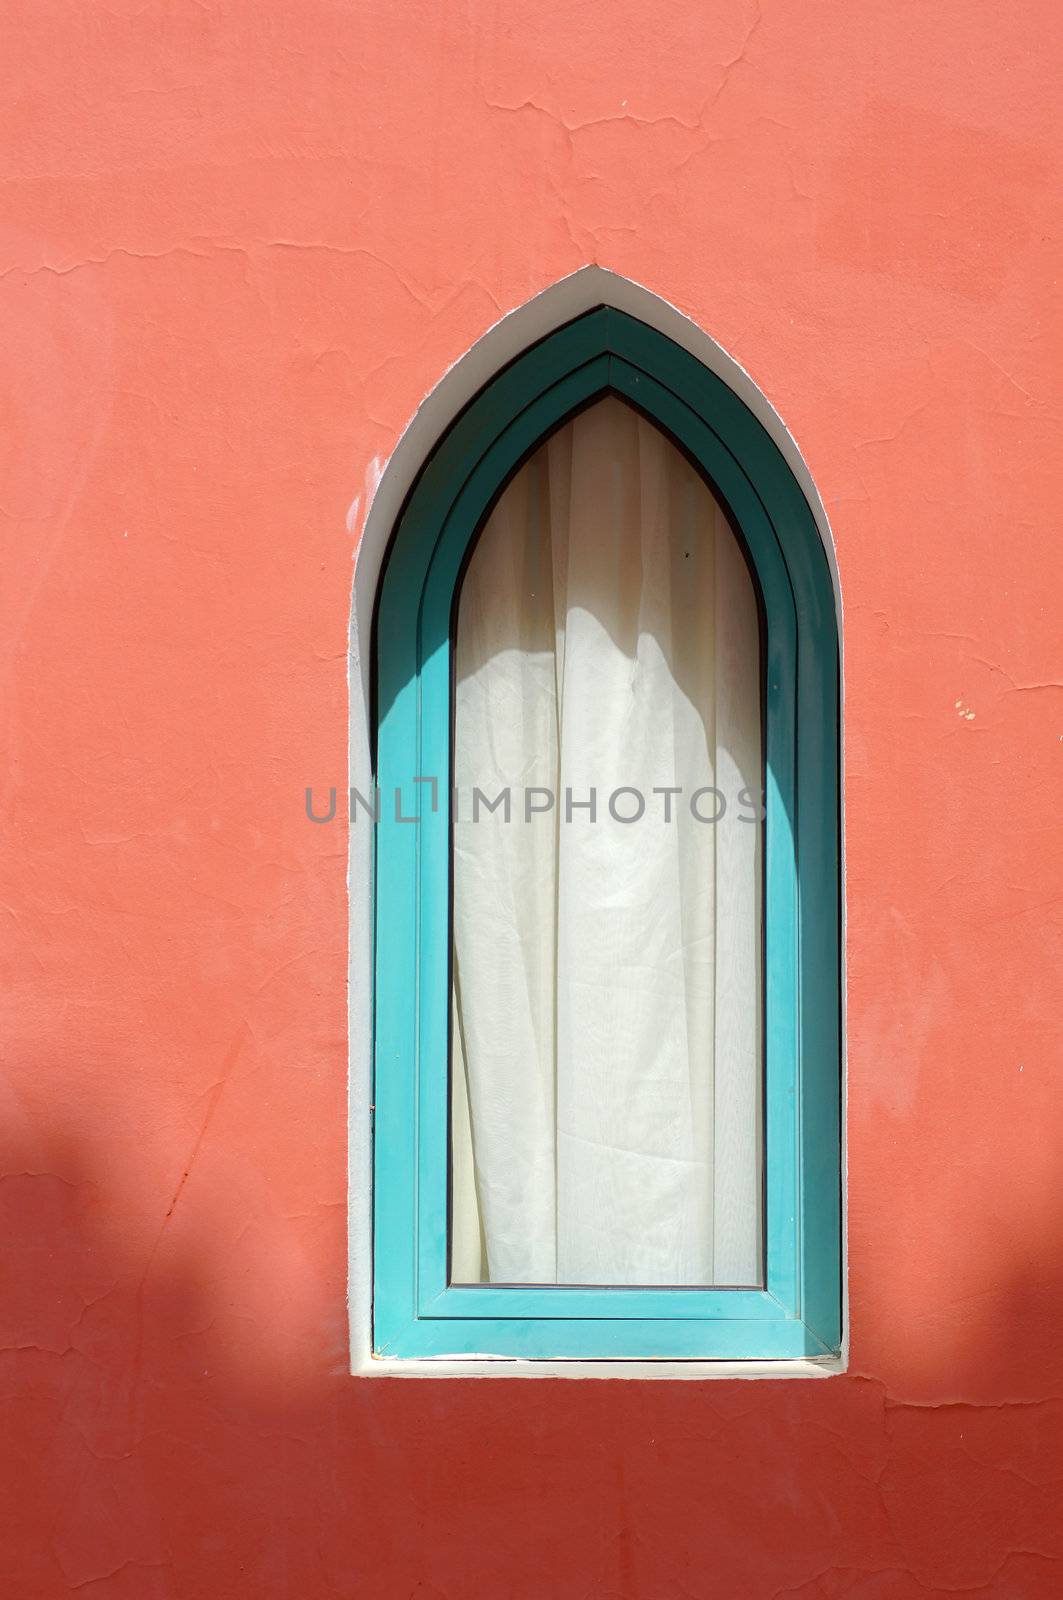 Arabic architecture: window on the red wall                